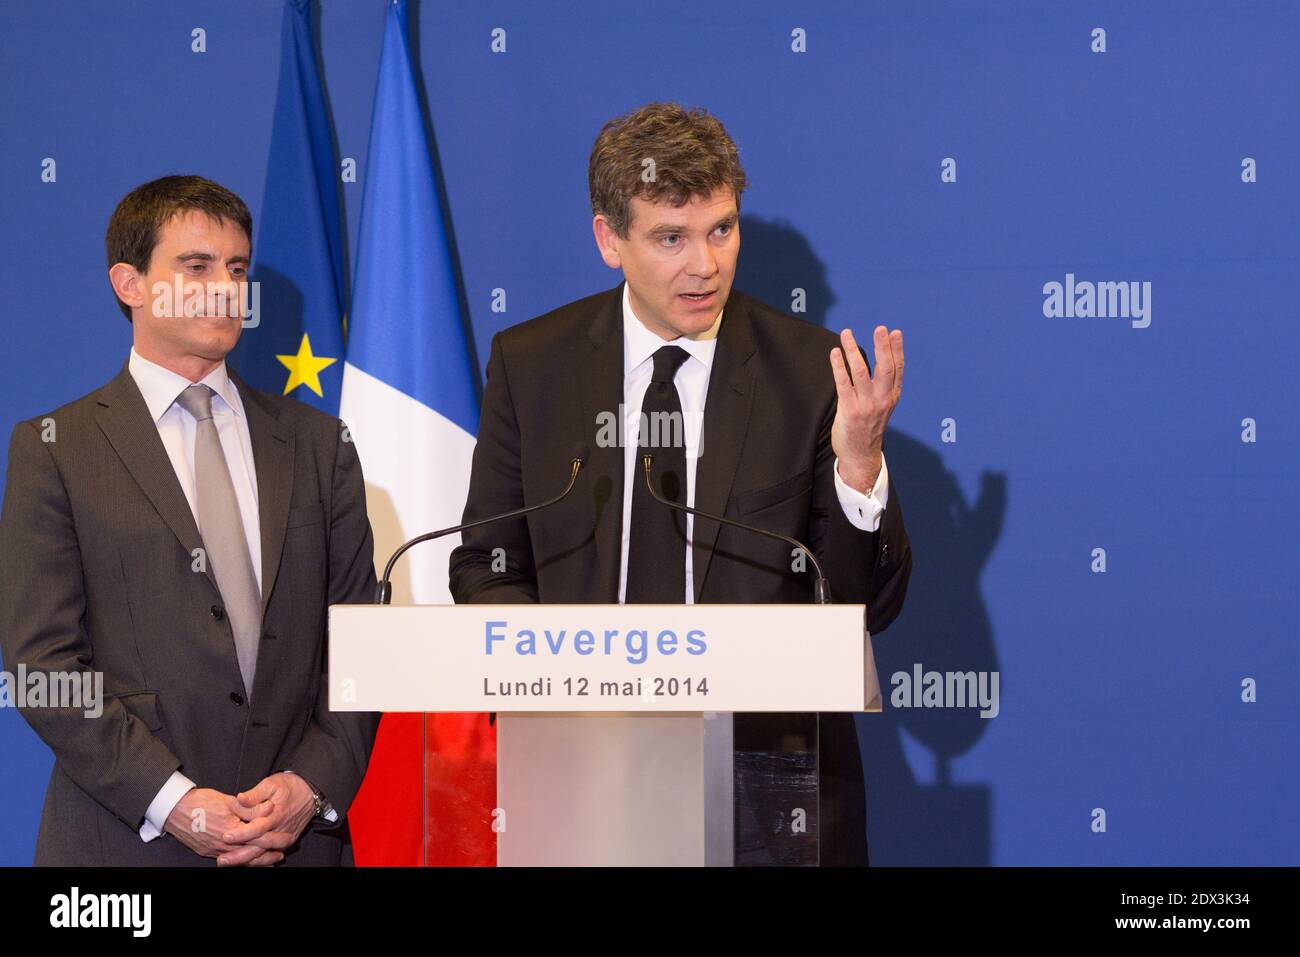 French PM Manuel Valls has submitted the government's resignation to President Francois Hollande and has been asked to form a new cabinet. The government was badly shaken on Sunday by criticism over its handling of the economy by economy minister Arnaud Montebourg. File photo : Arnaud Montebourg and Prime mnnister Manuel Valls visits Straubli plant in Faverges, France wifh the Chairman françois morisse and former nationl assembly president Bernard Accoyer on May 12, 2014. Photos by Vincent Dargent/ABACAPRESS.COM Stock Photo